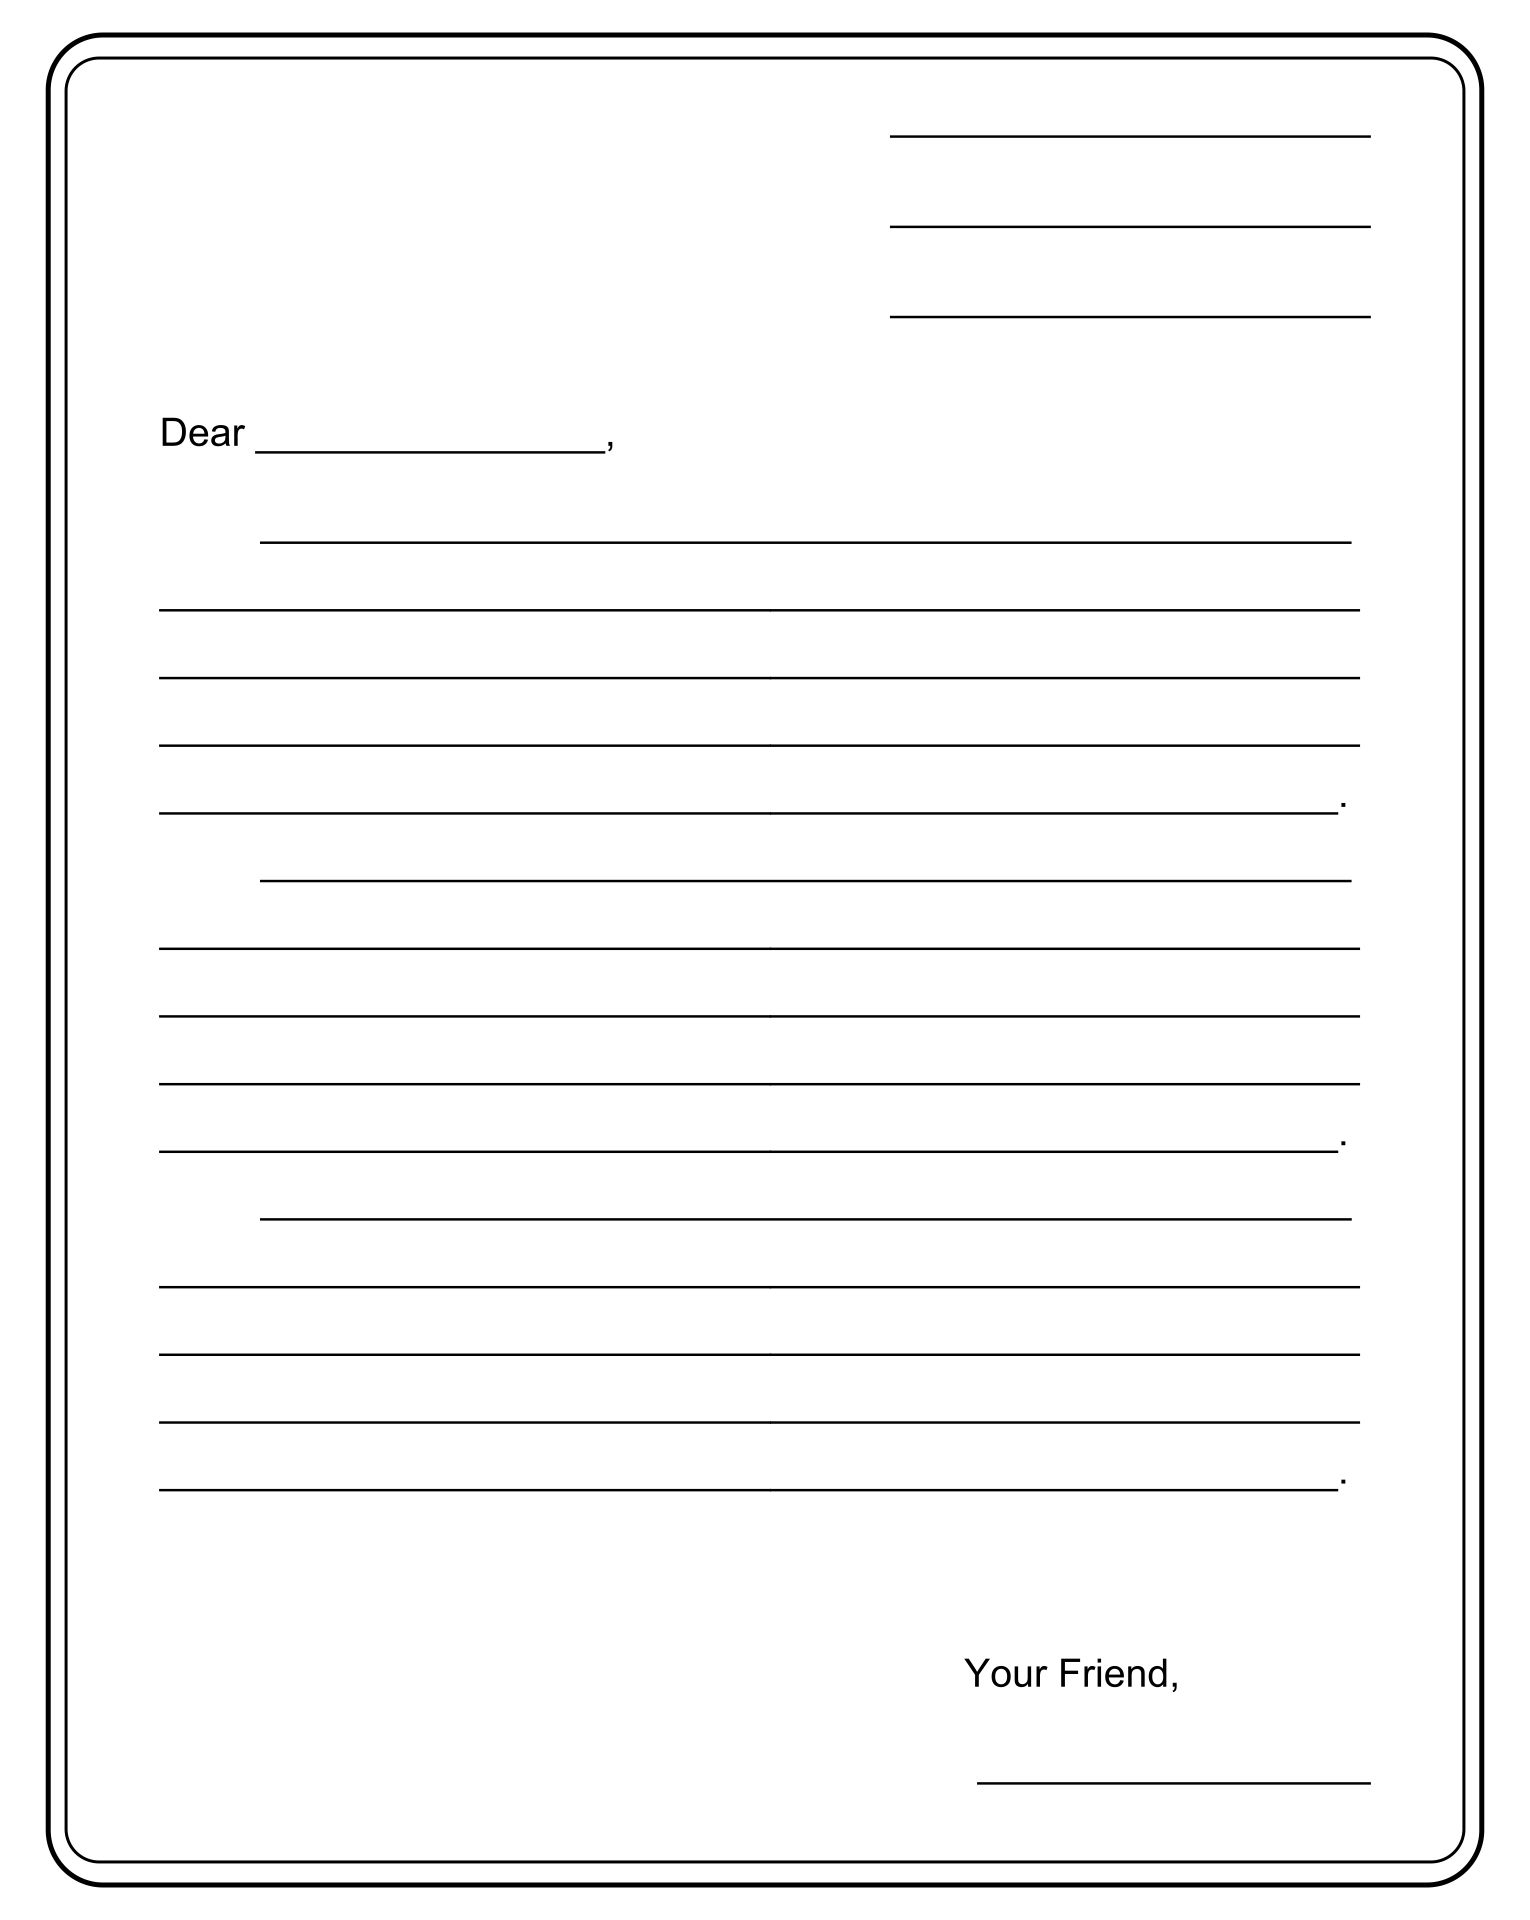 8 Best Images of Printable Blank Letter Template LetterWriting